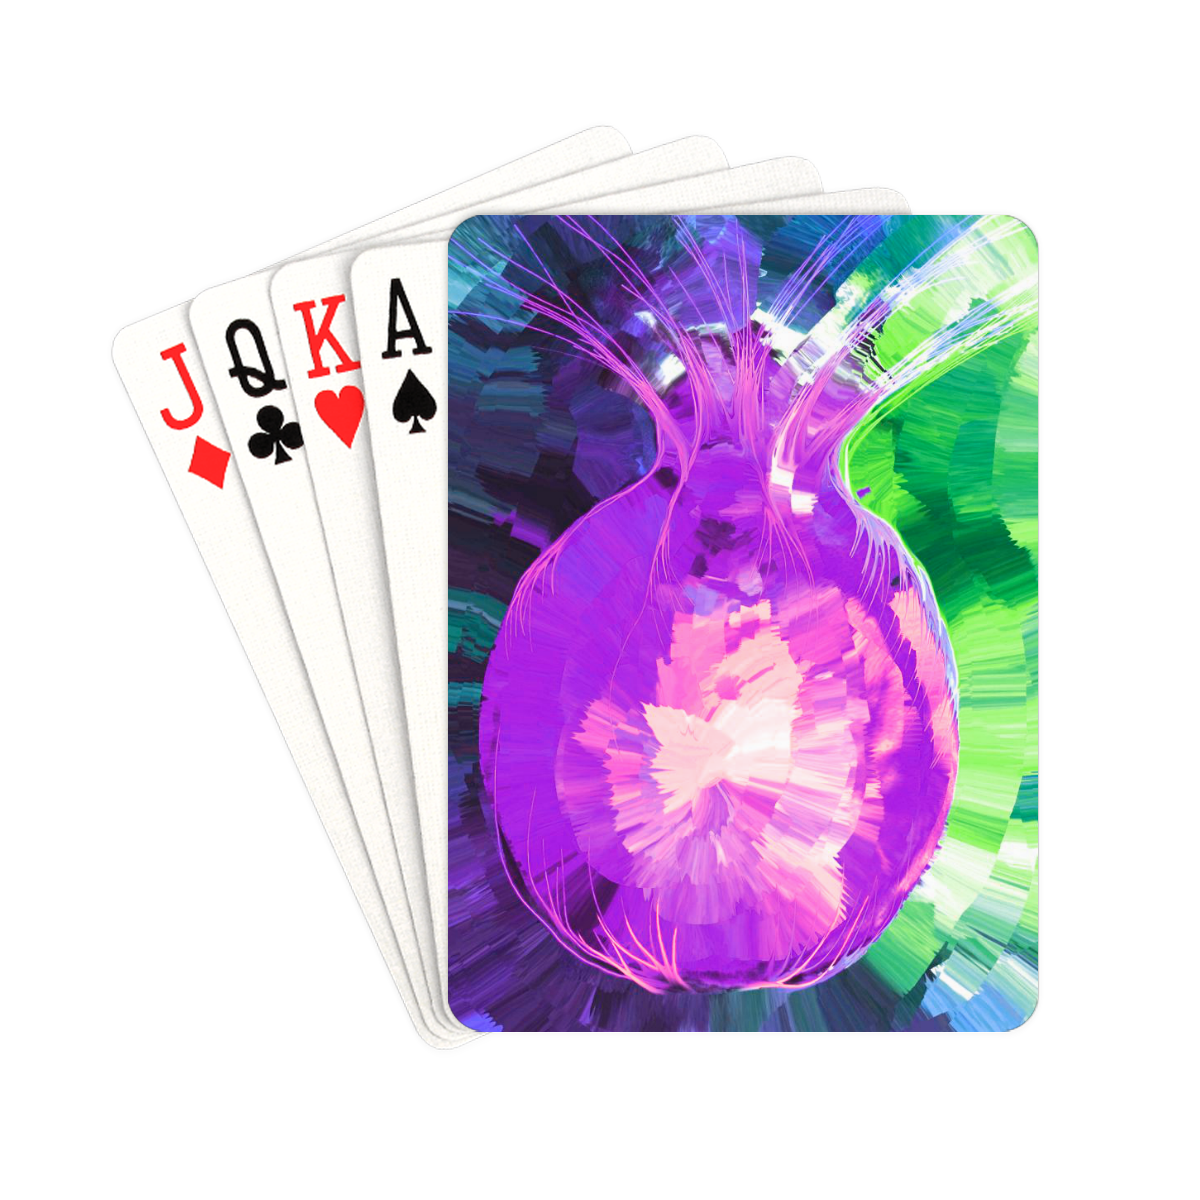 39-10 Playing Cards 2.5"x3.5"